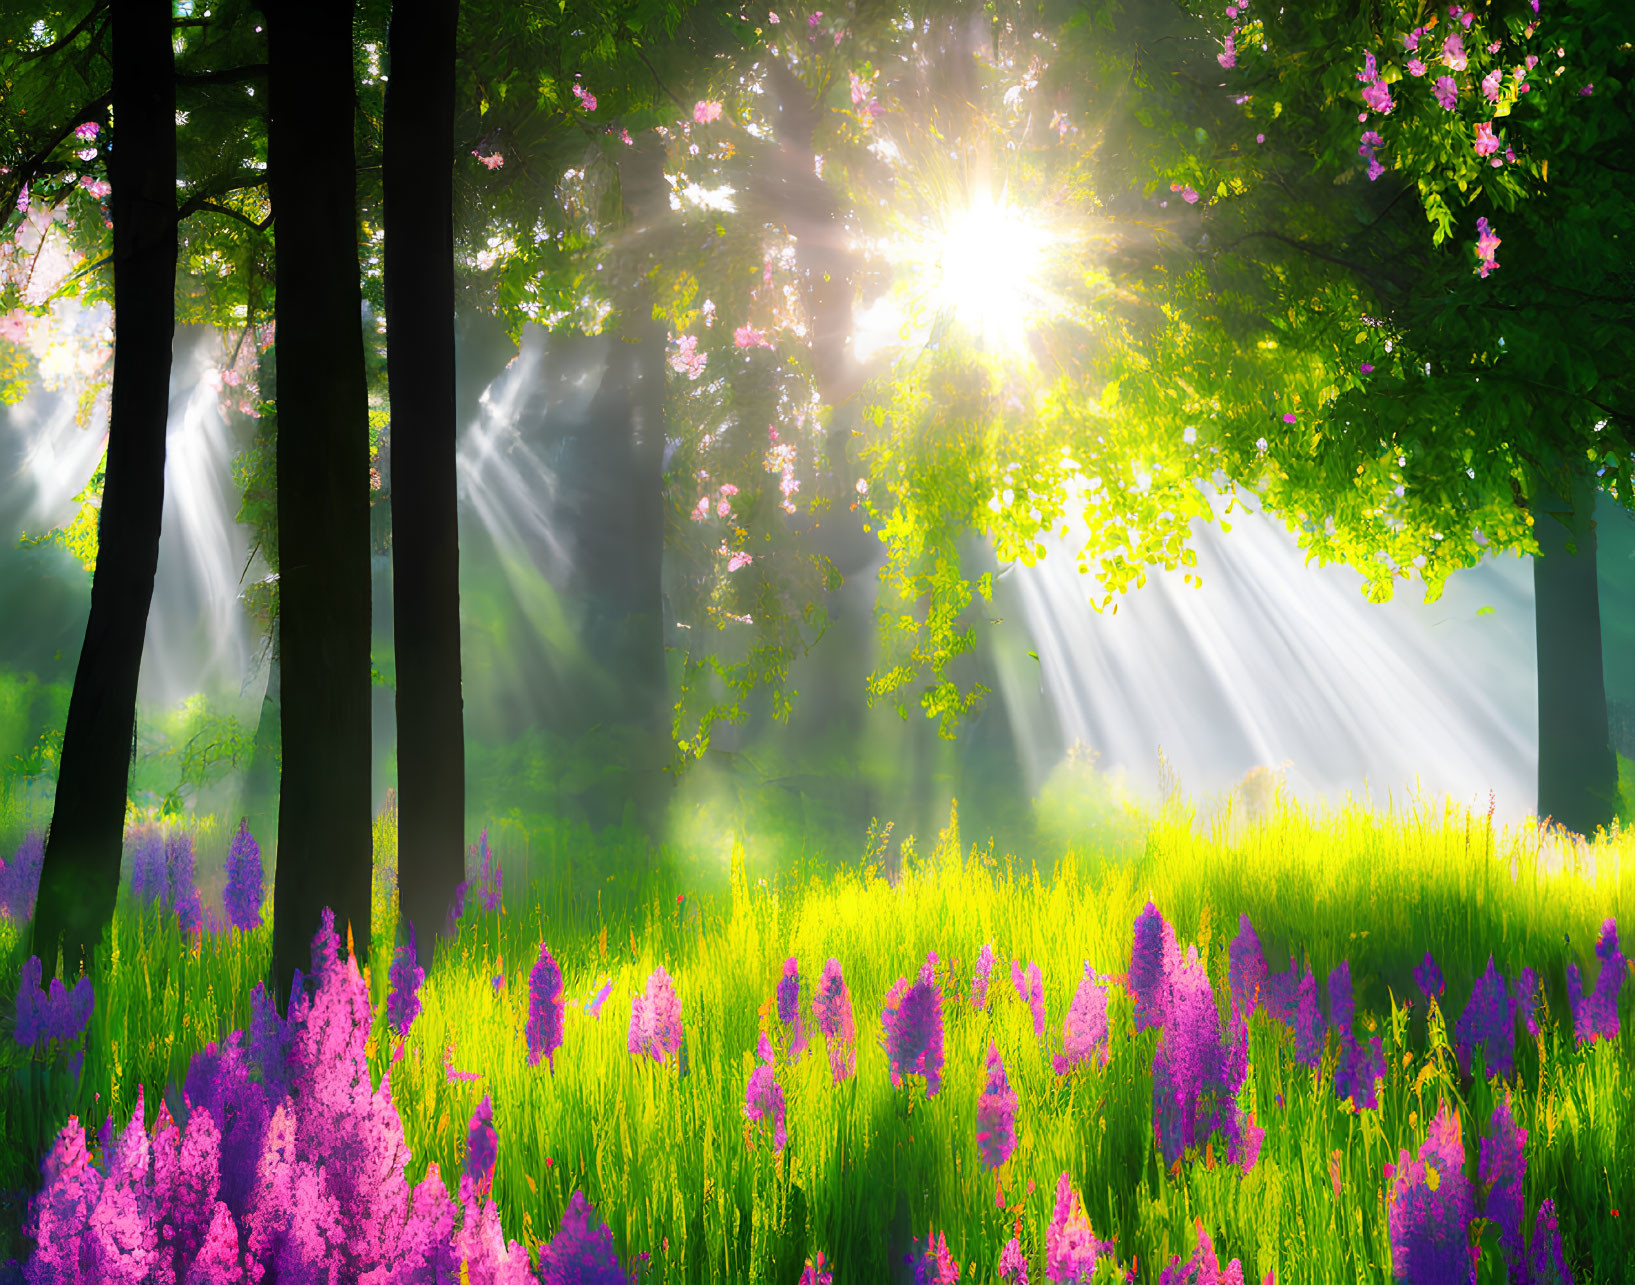 Lush green forest with sunlight, purple wildflowers, and green grass